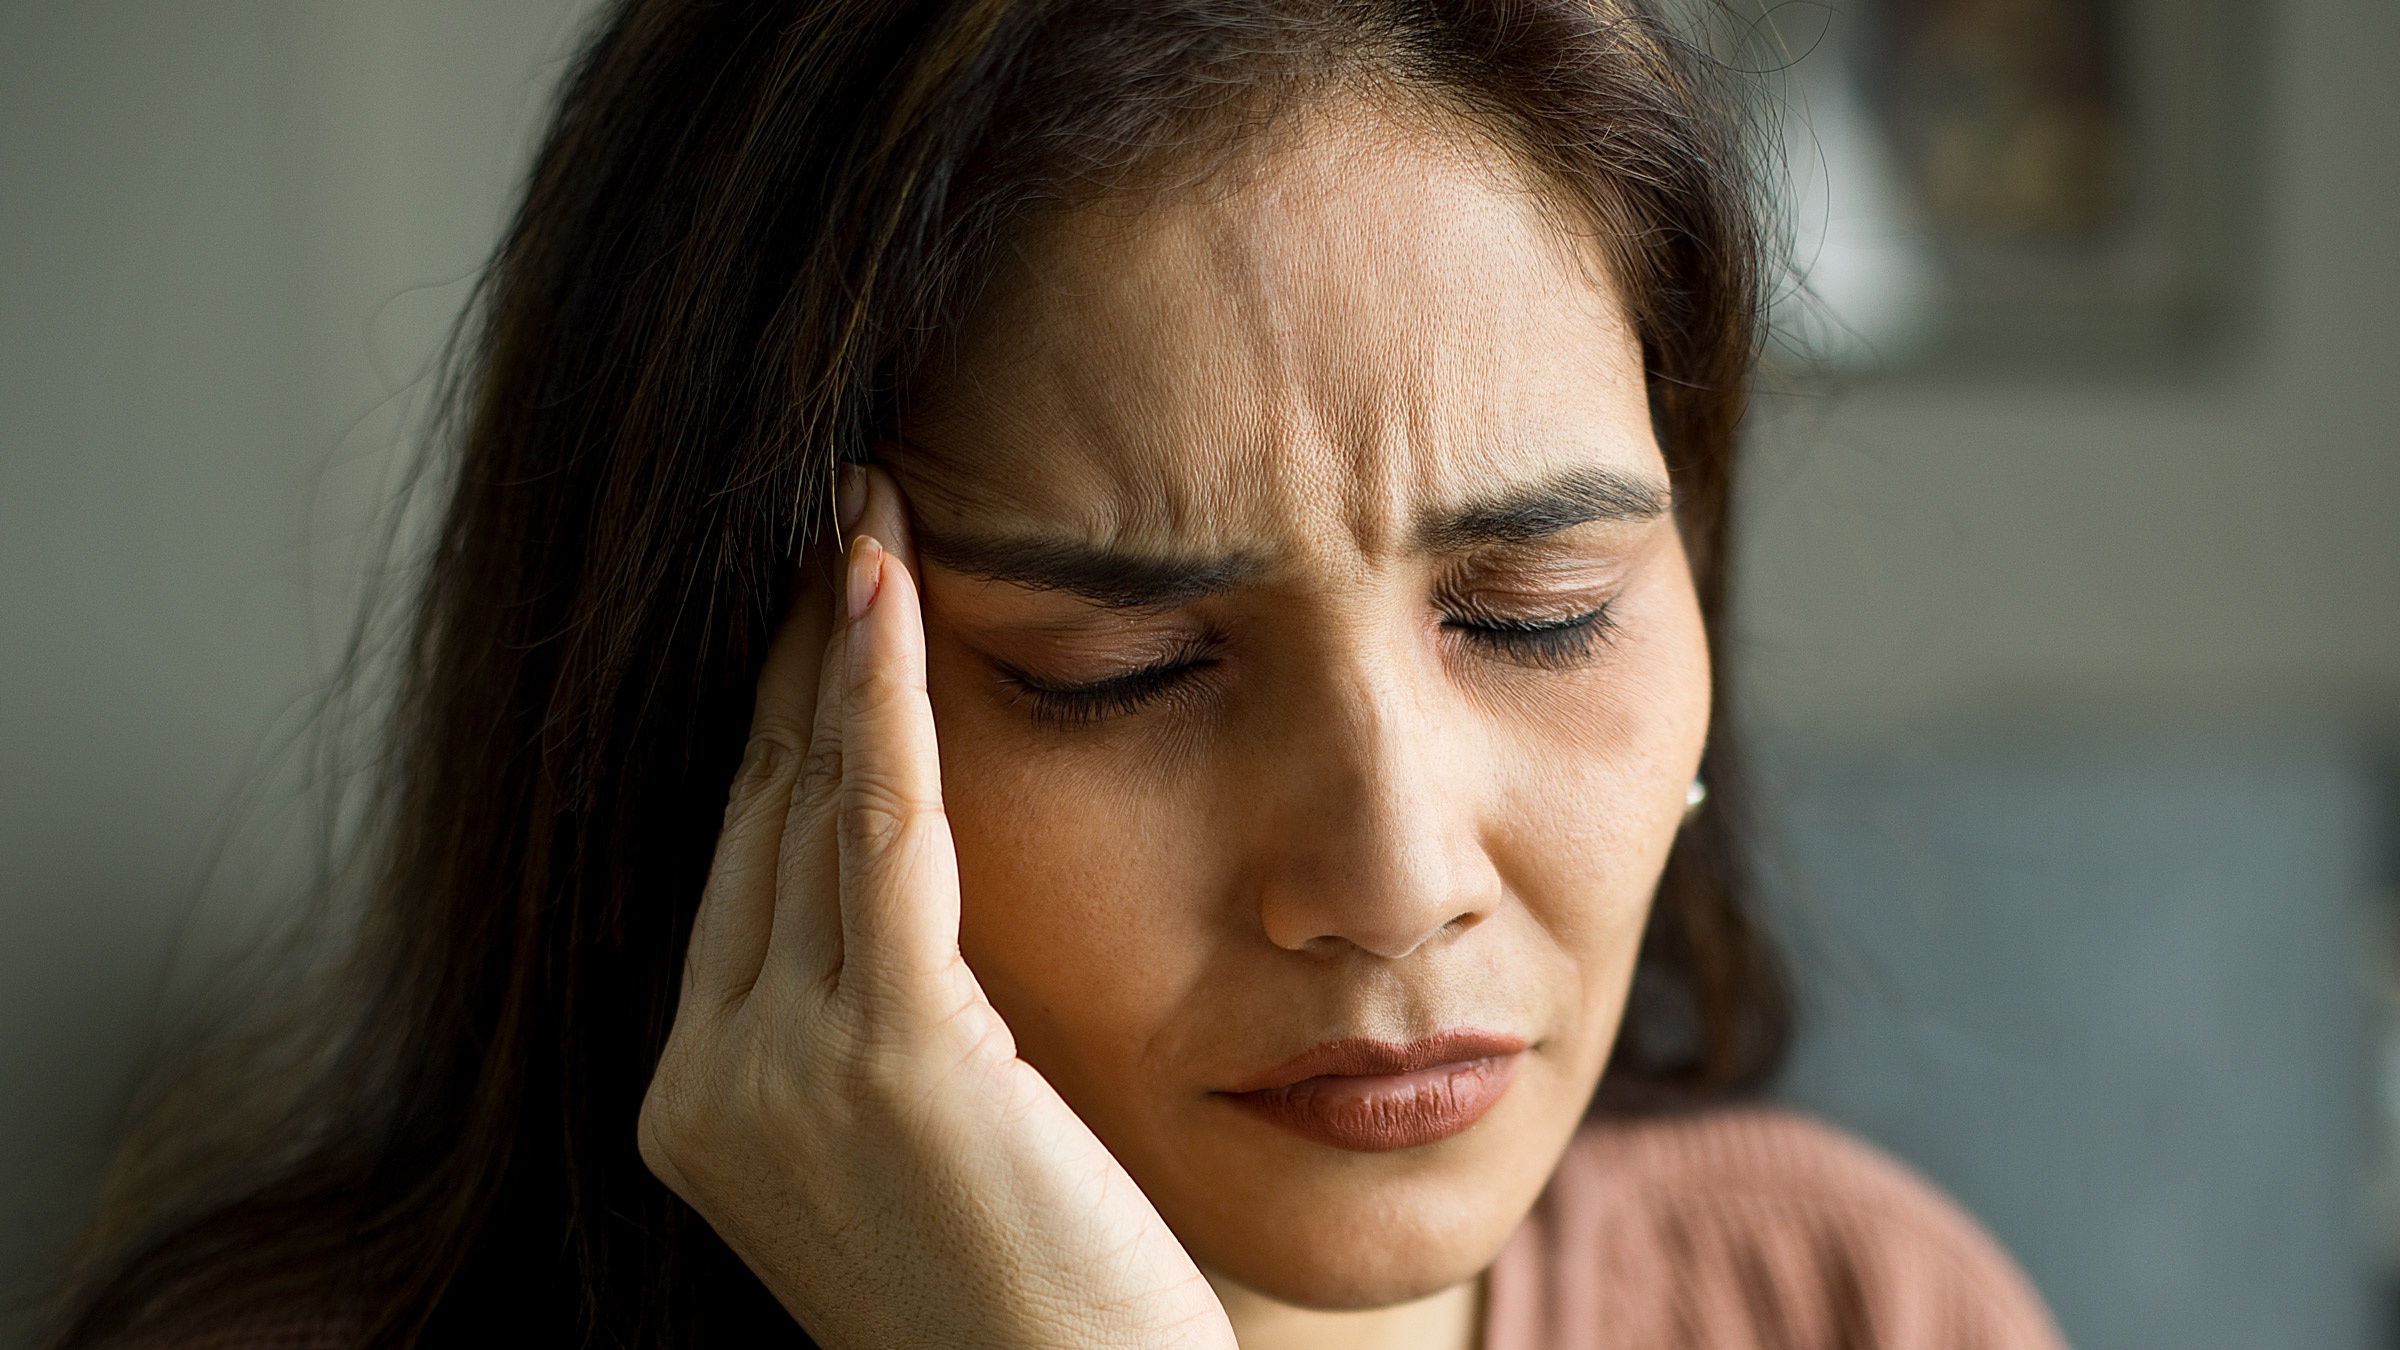 9 Things People With Migraine Want You to Know